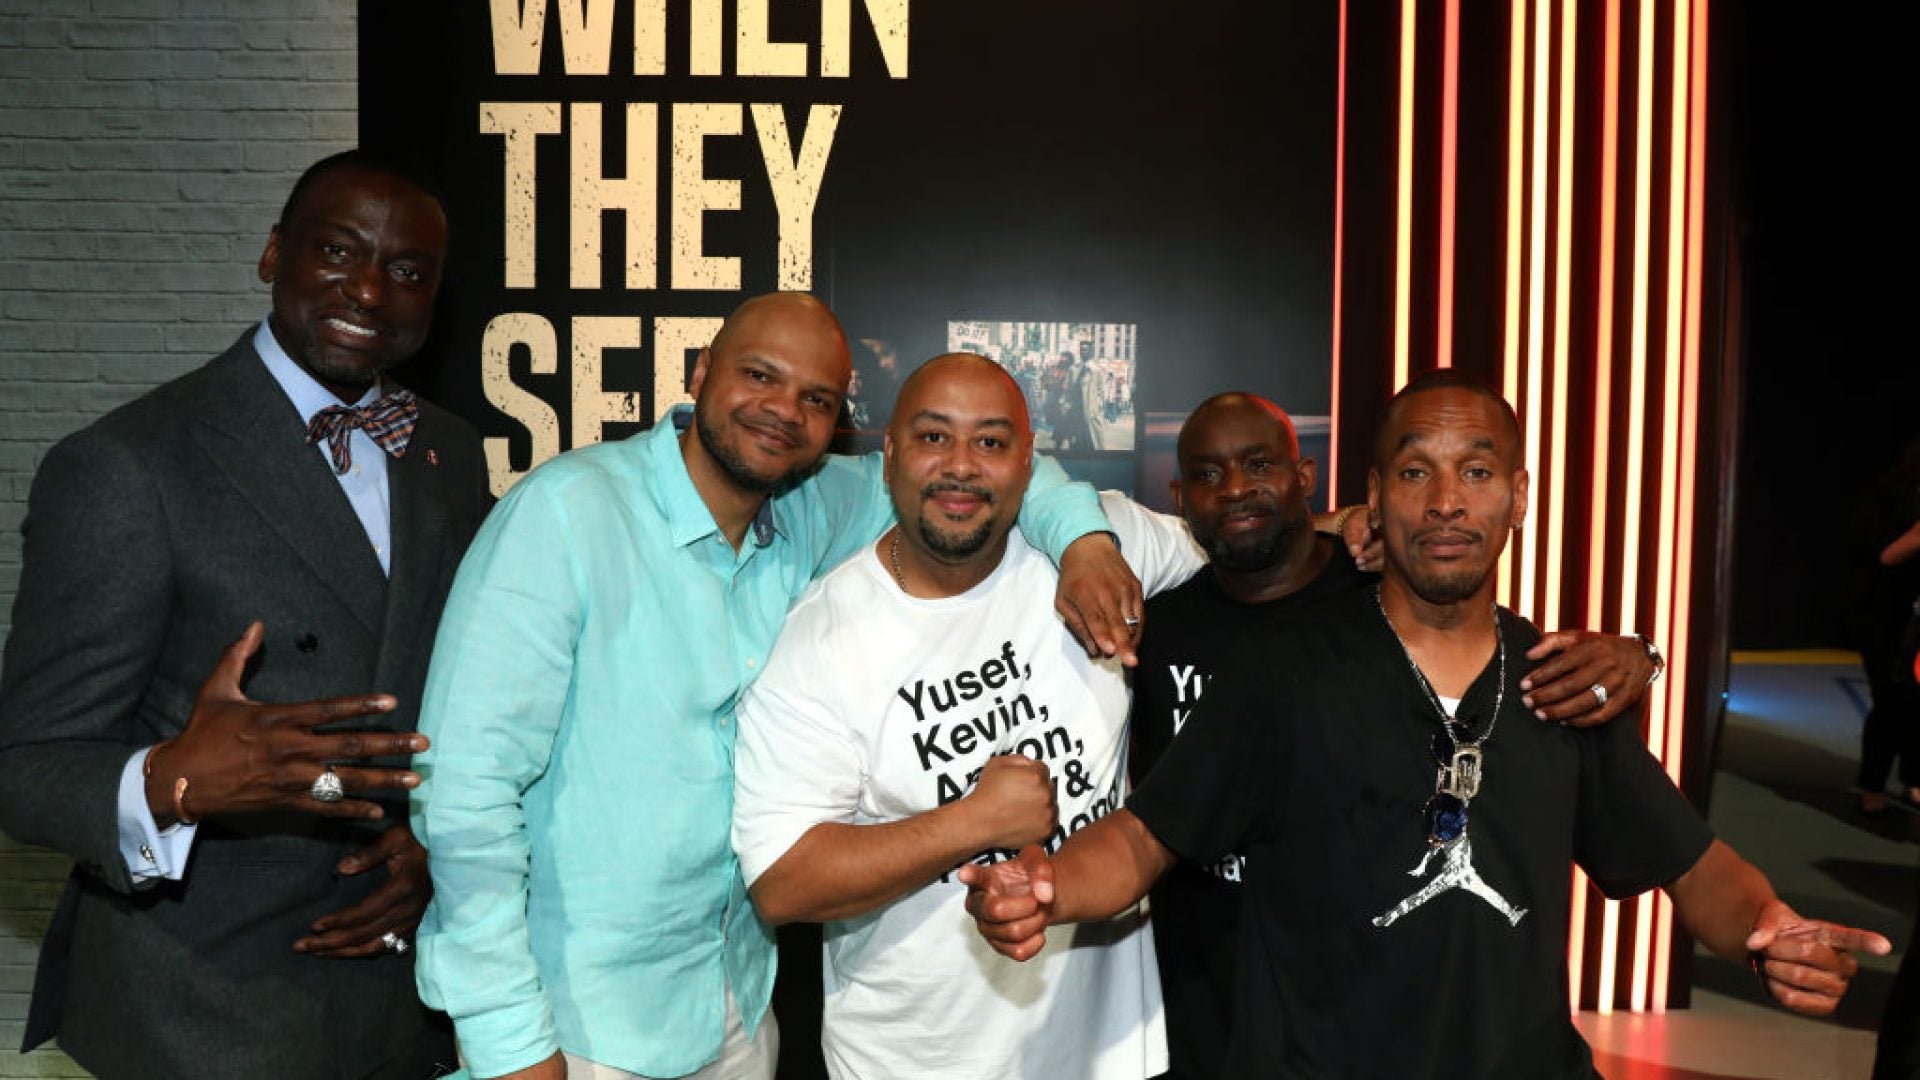 Central Park Unveils Entrance In Honor Of The 'Exonerated Five'